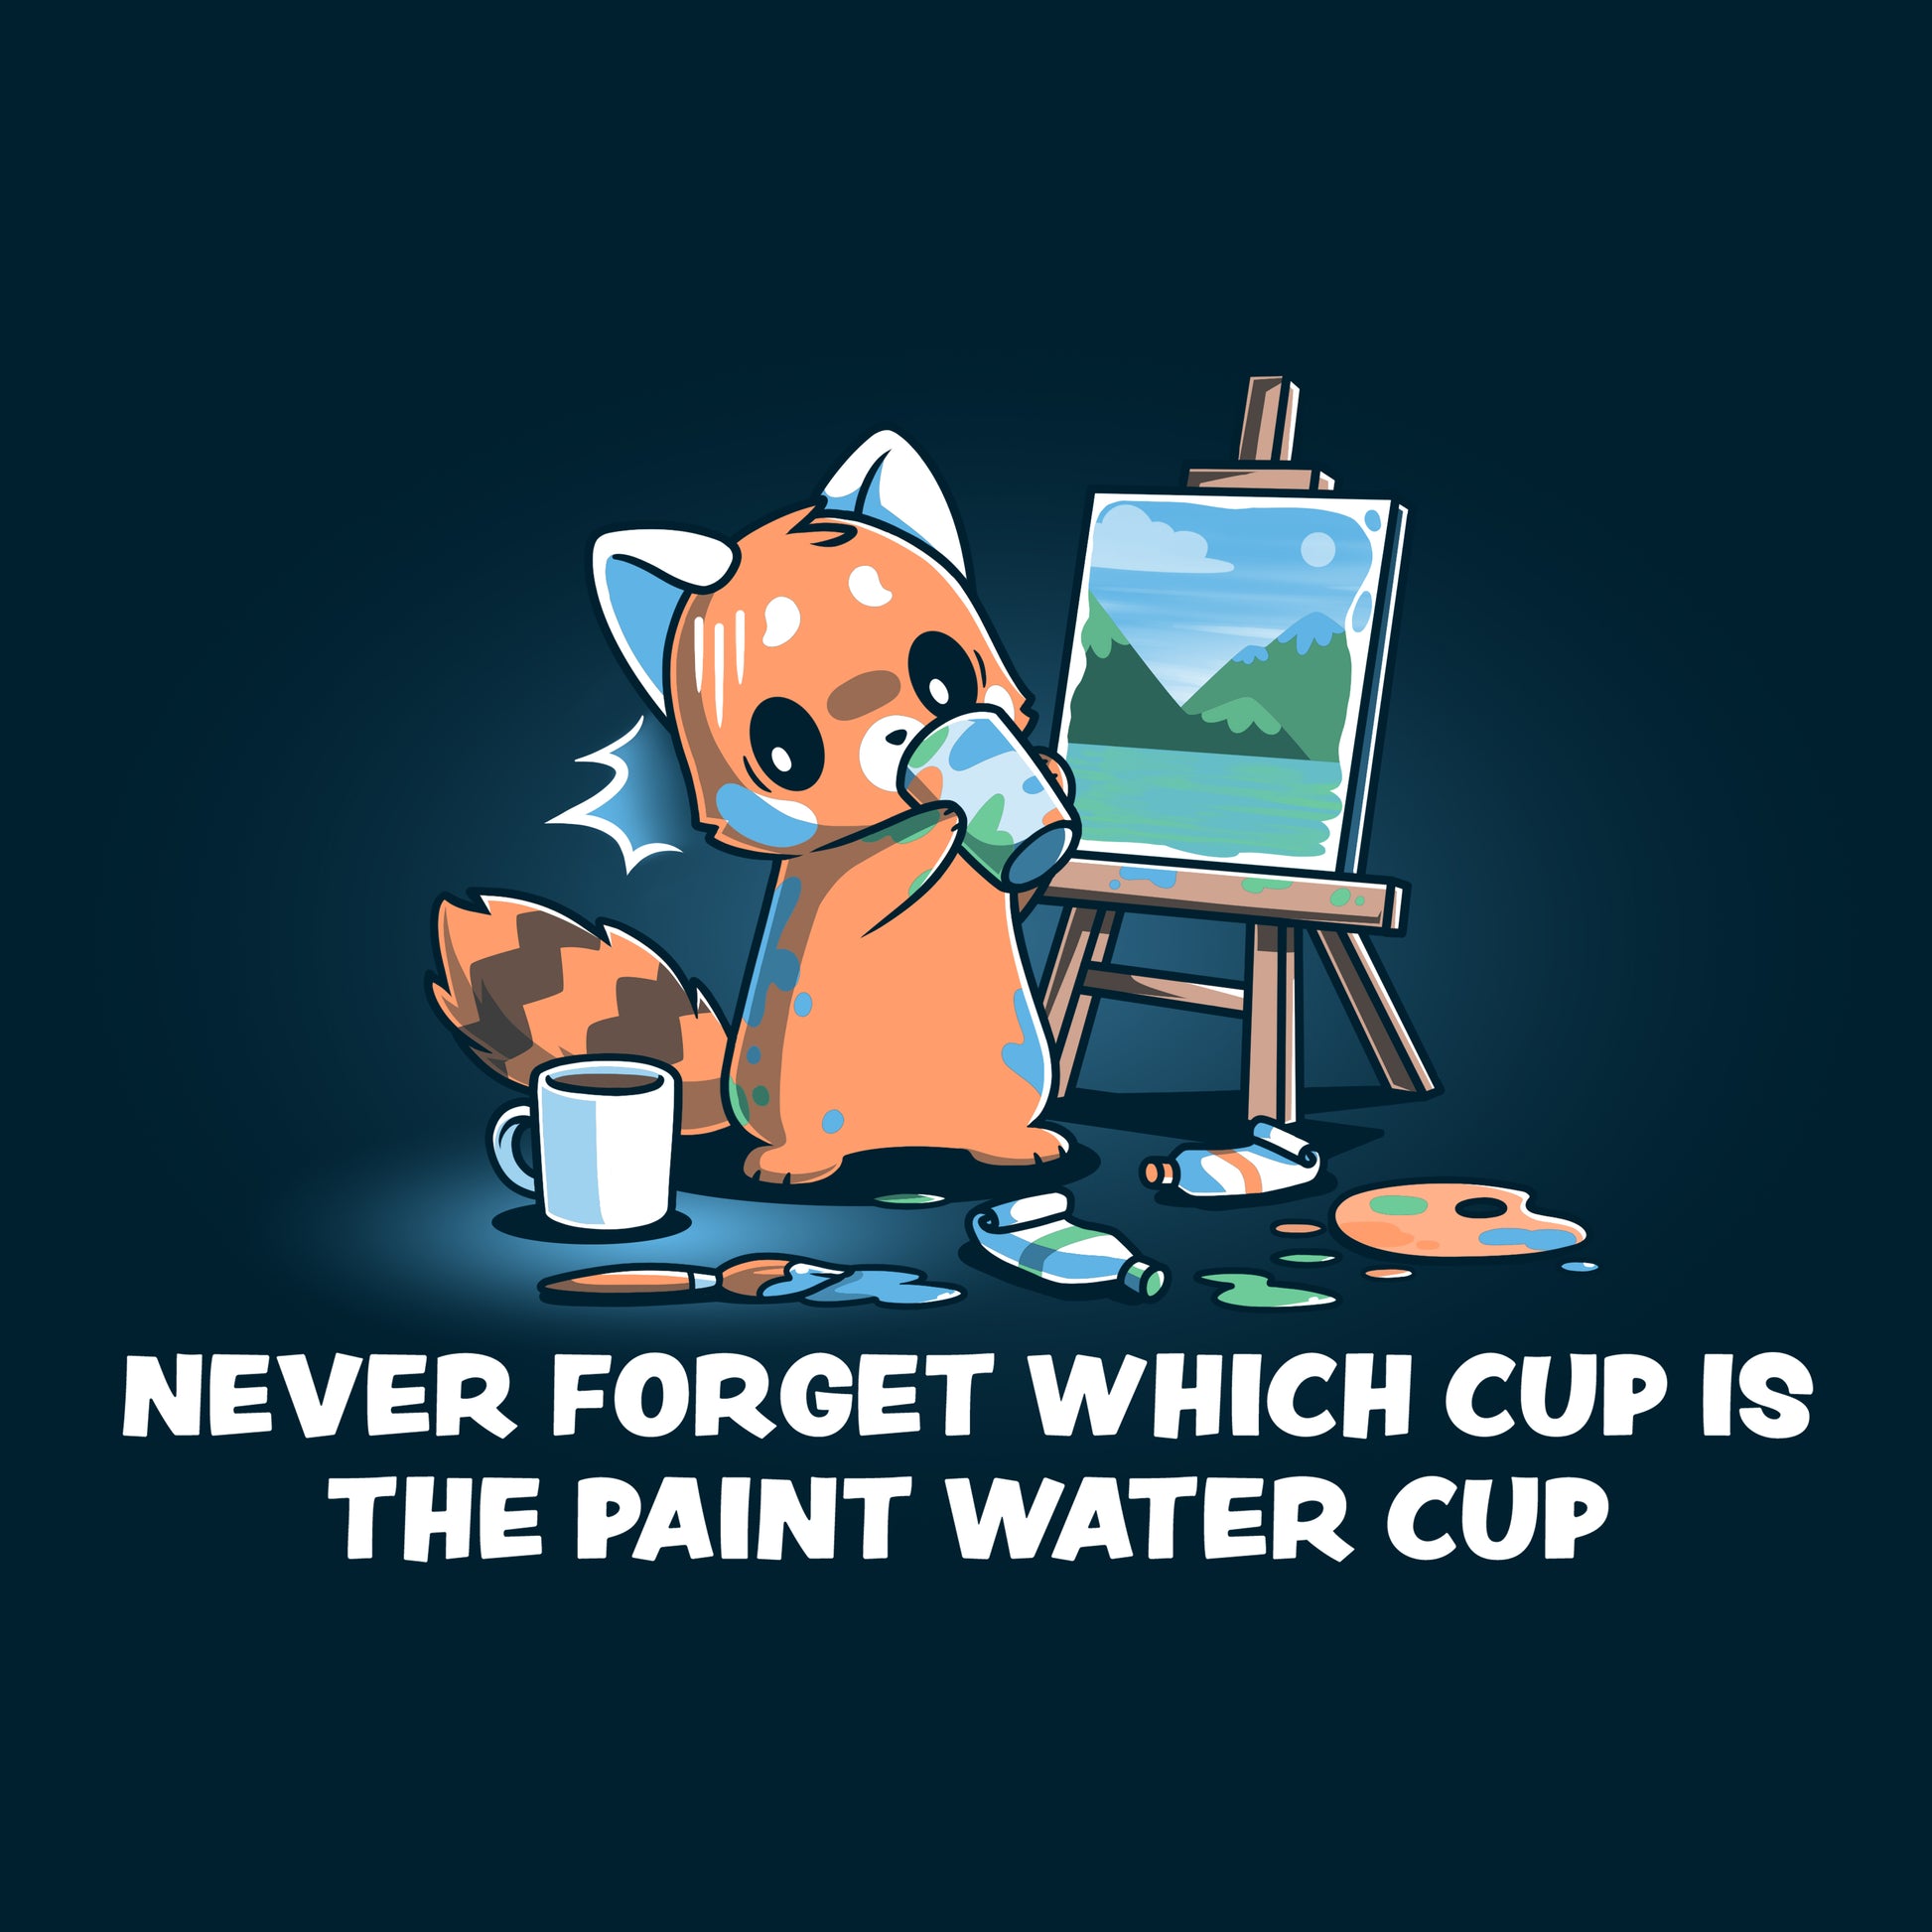 Never forget which cup is the Don’t Drink the Paint Water navy blue water cup by TeeTurtle.